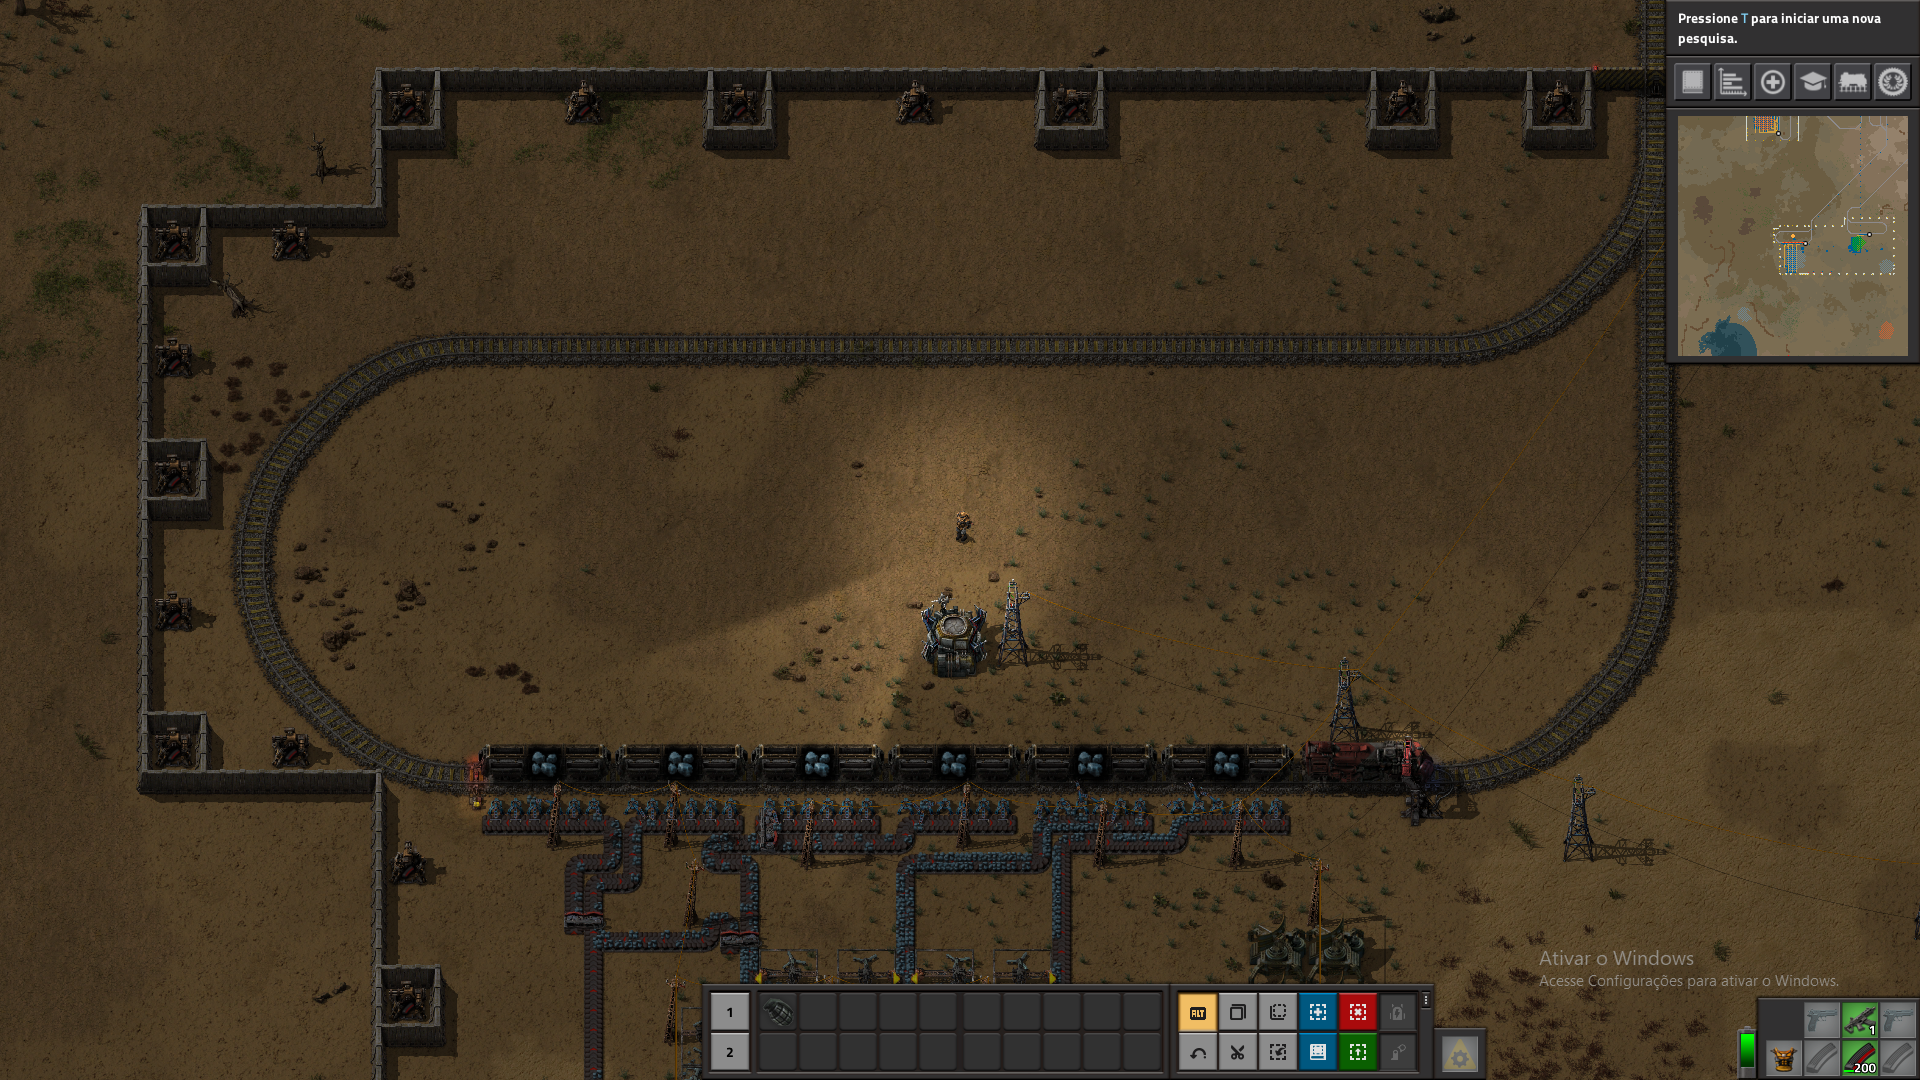 My Ore mines station